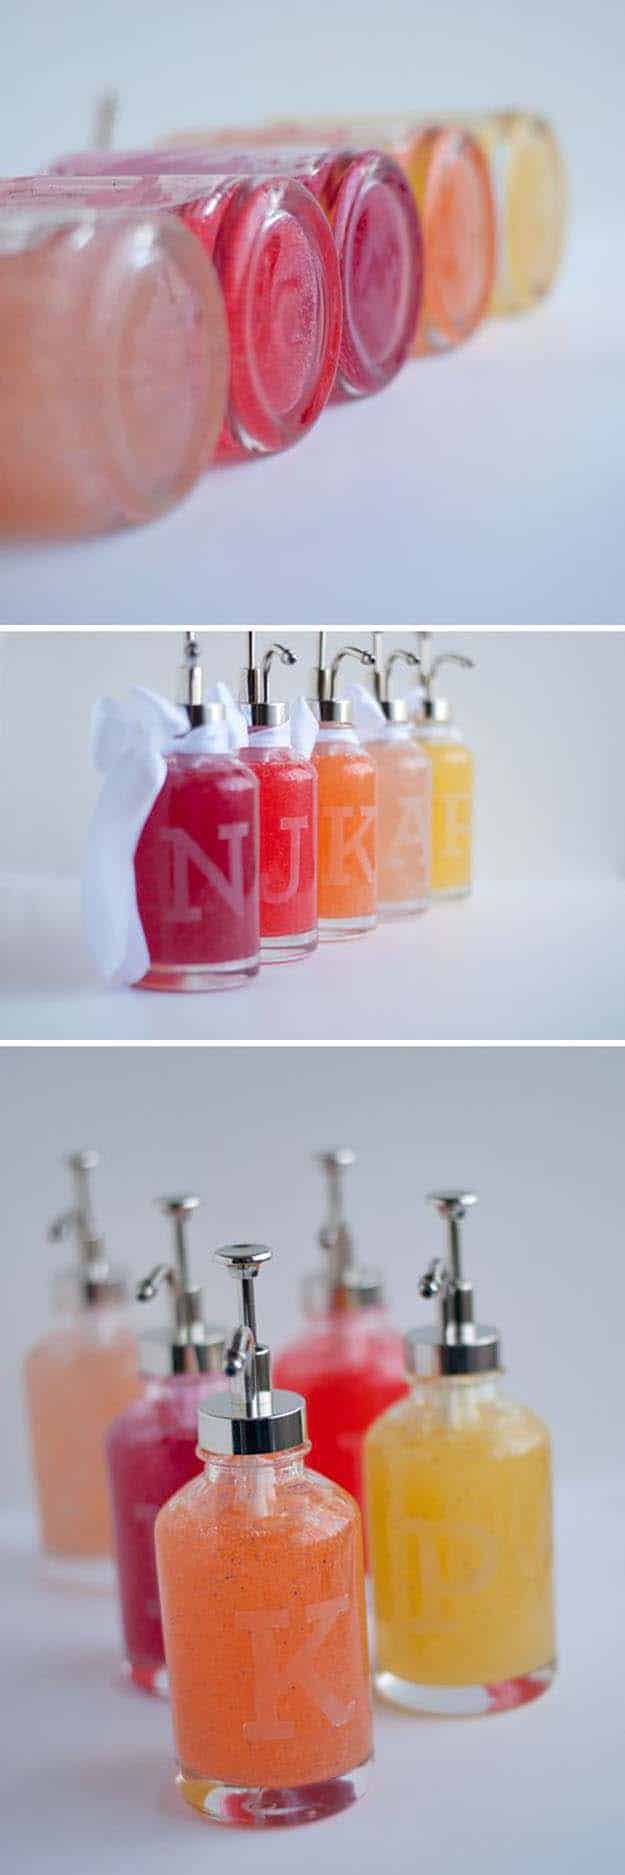 Easy DIY Project Ideas for the Home | Easy Glass Etching Tutorial | DIY Glass Etched Soap Dispensers | DIY Projects and Crafts by DIY JOY at http://diyjoy.com/craft-ideas-diy-soap-dispensers